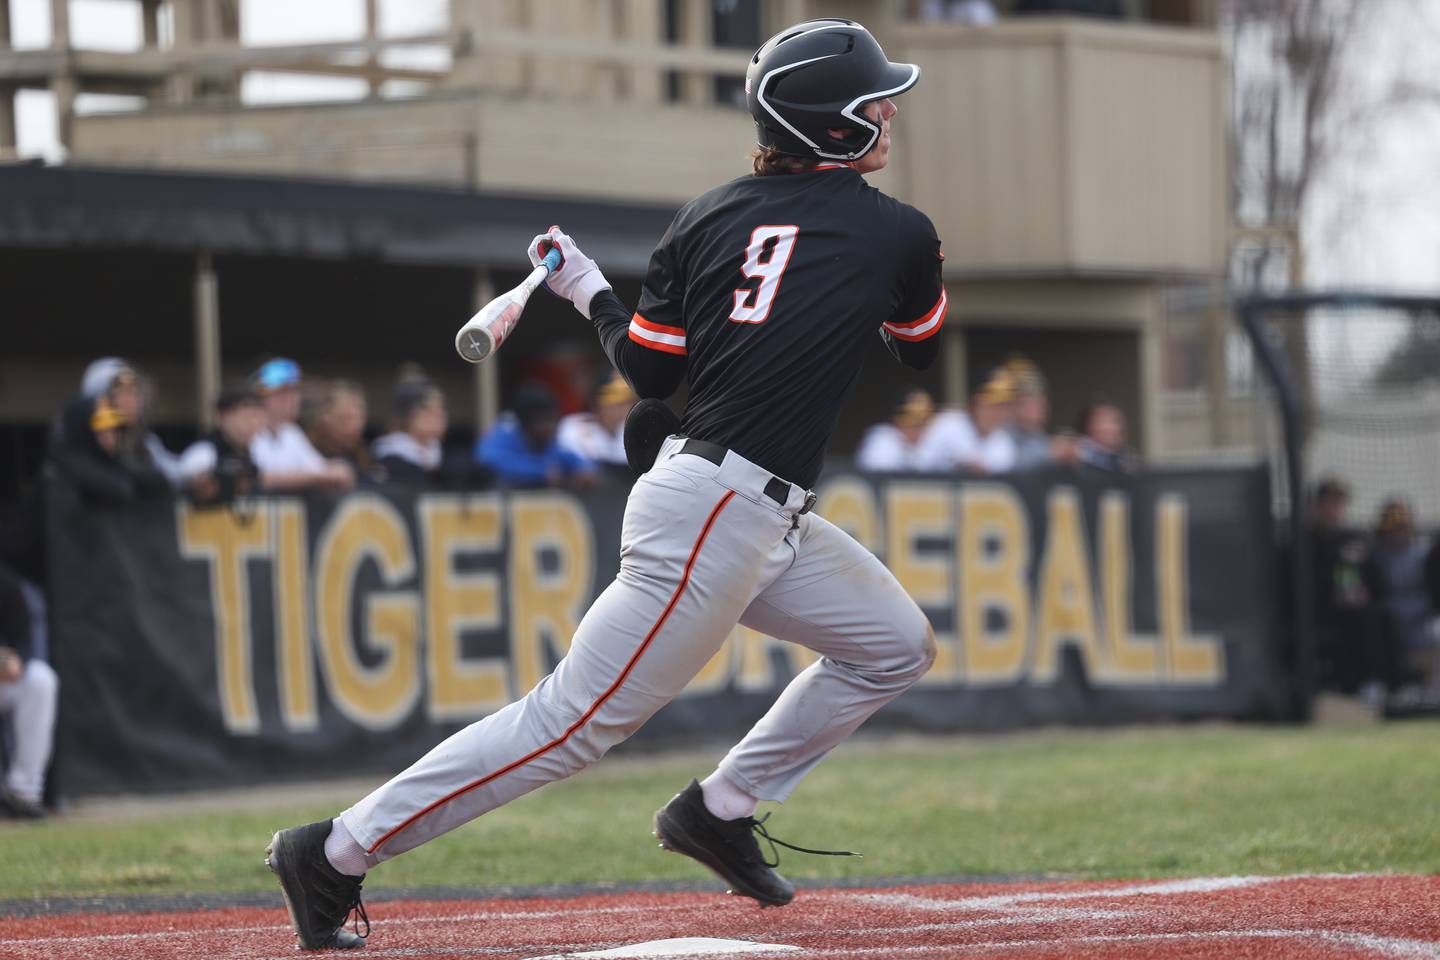 Minooka’s Nate George drives in two runs to break a scoreless game in the 6th inning against Joliet West on Tuesday, April 4, 2023 in Joliet.